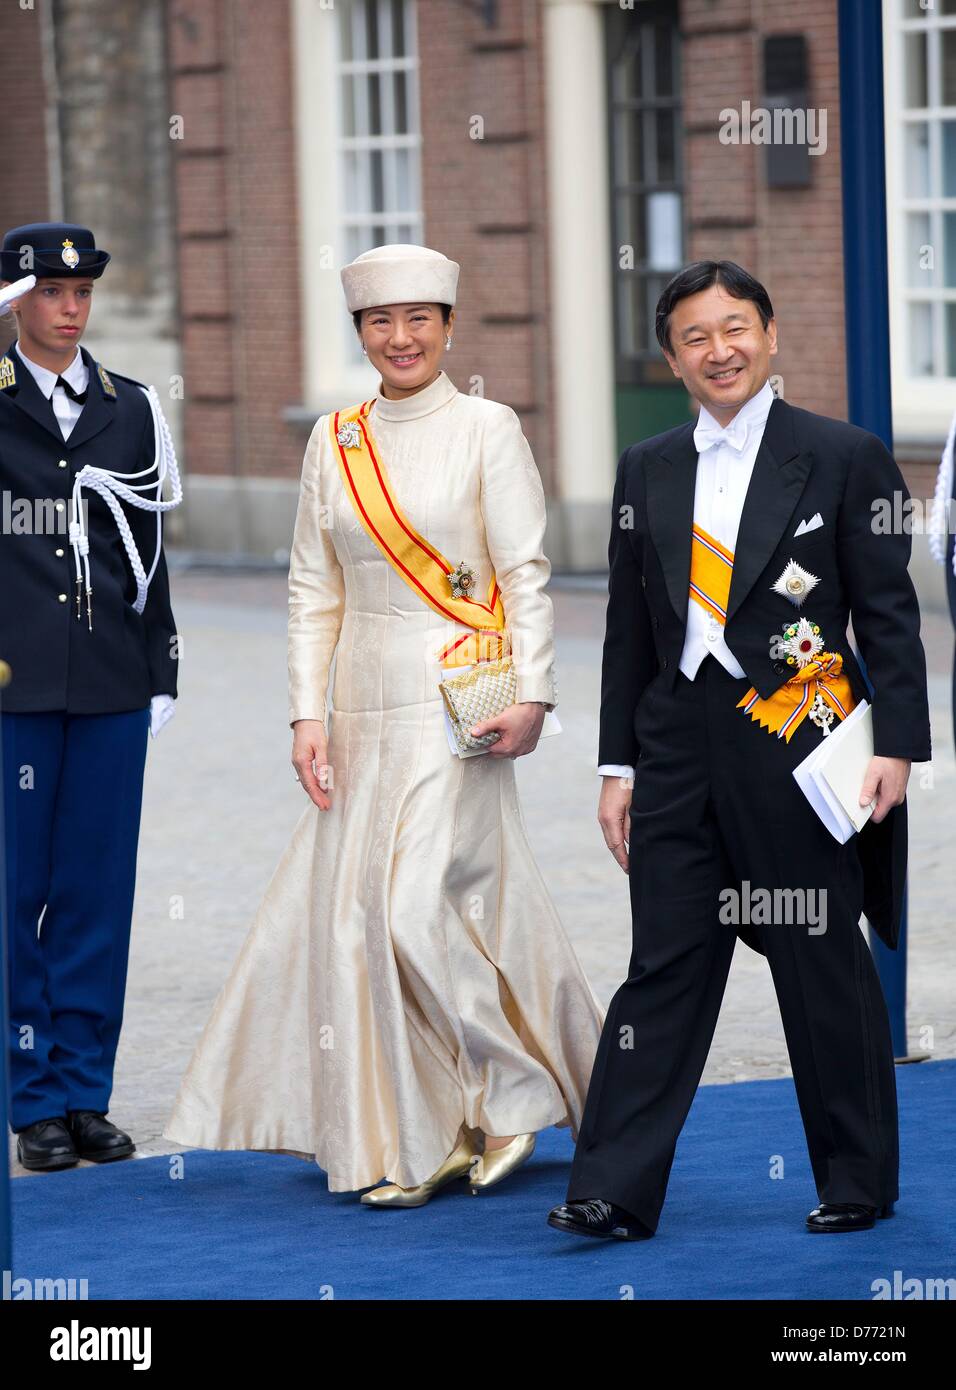 Amsterdam, Netherlands. 30th April 2013. Crown Prince Naruhito of Japan and Princess Masako of Japan leaves the Nieuwe Kerk in Amsterdam, , where the investiture of the new king took place. Photo: Albert Nieboer /  / Alamy Live News Stock Photo